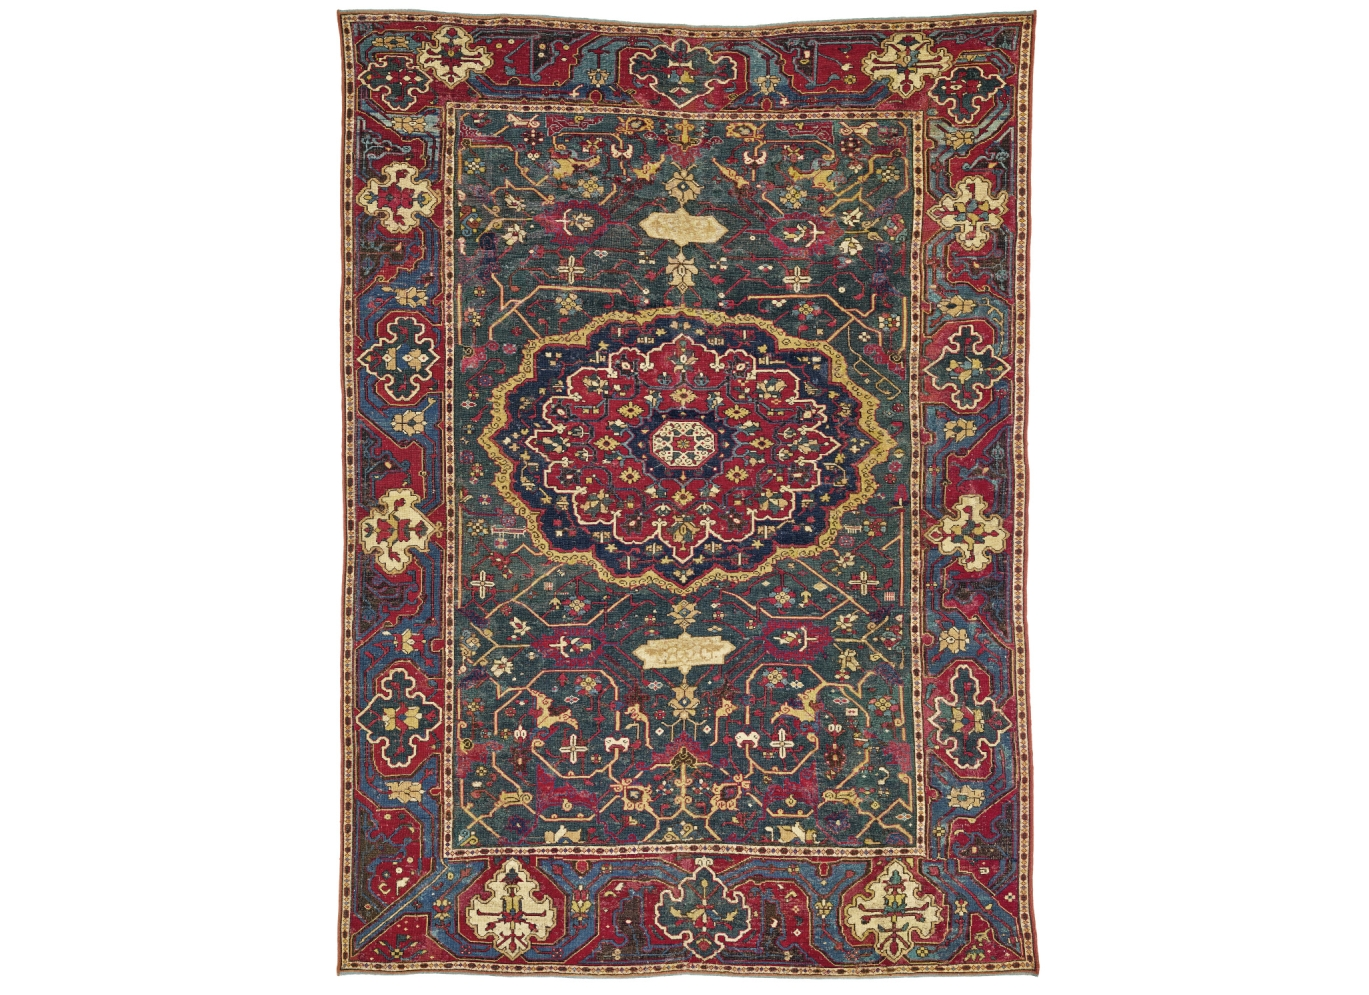 MIA adds significant ‘Orient Stars’ to textile collection